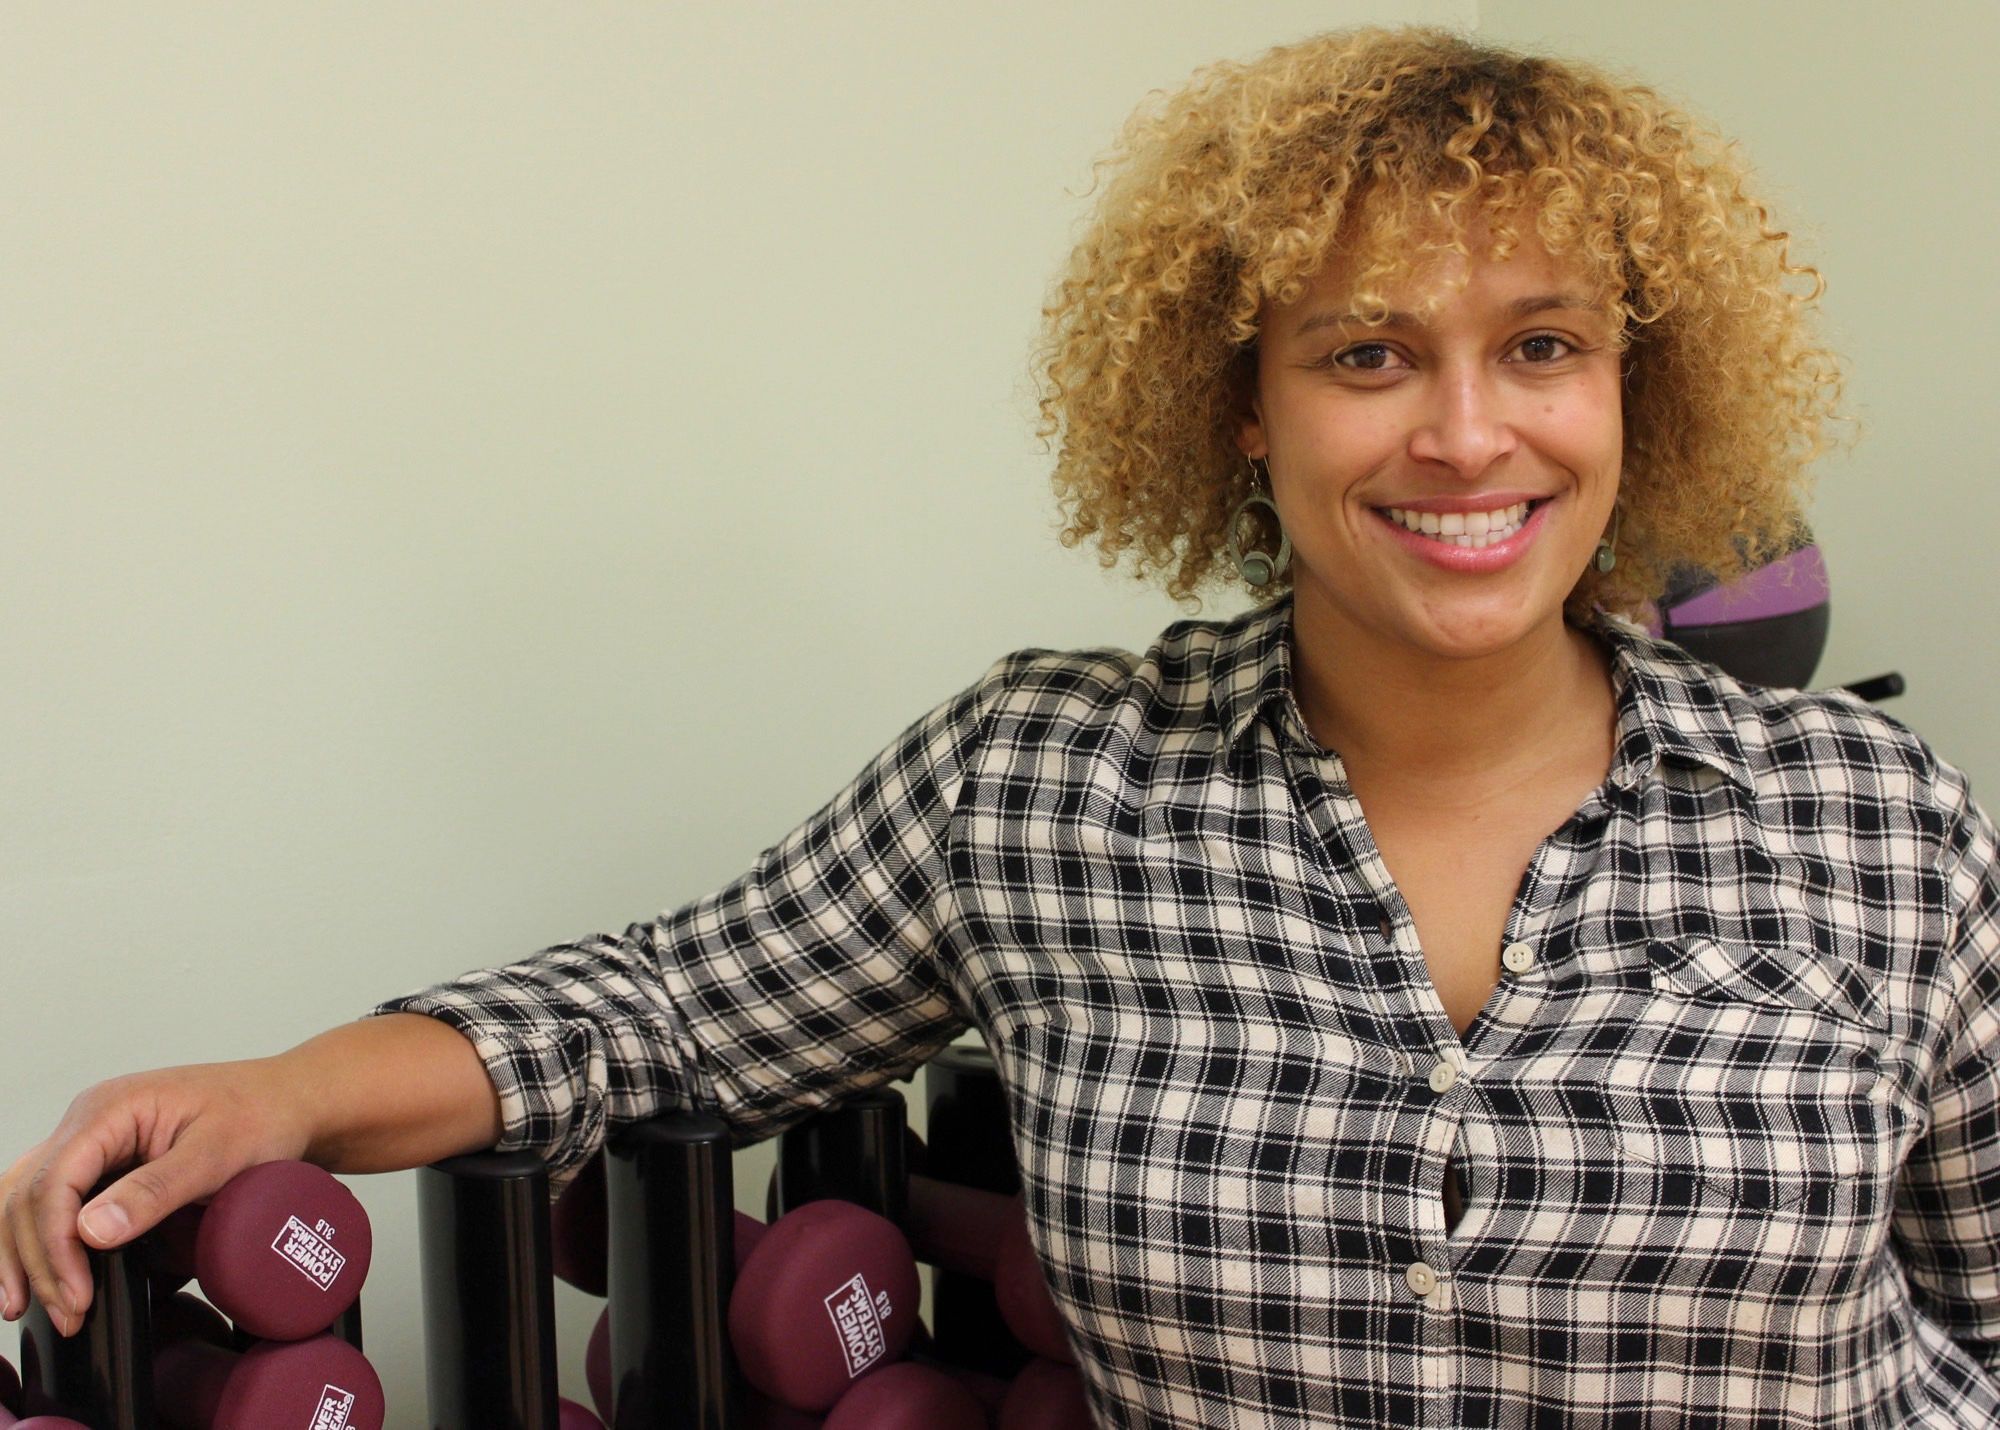 Neighbor Janine Labriola Plans To Bring Personalized Workouts To The Community